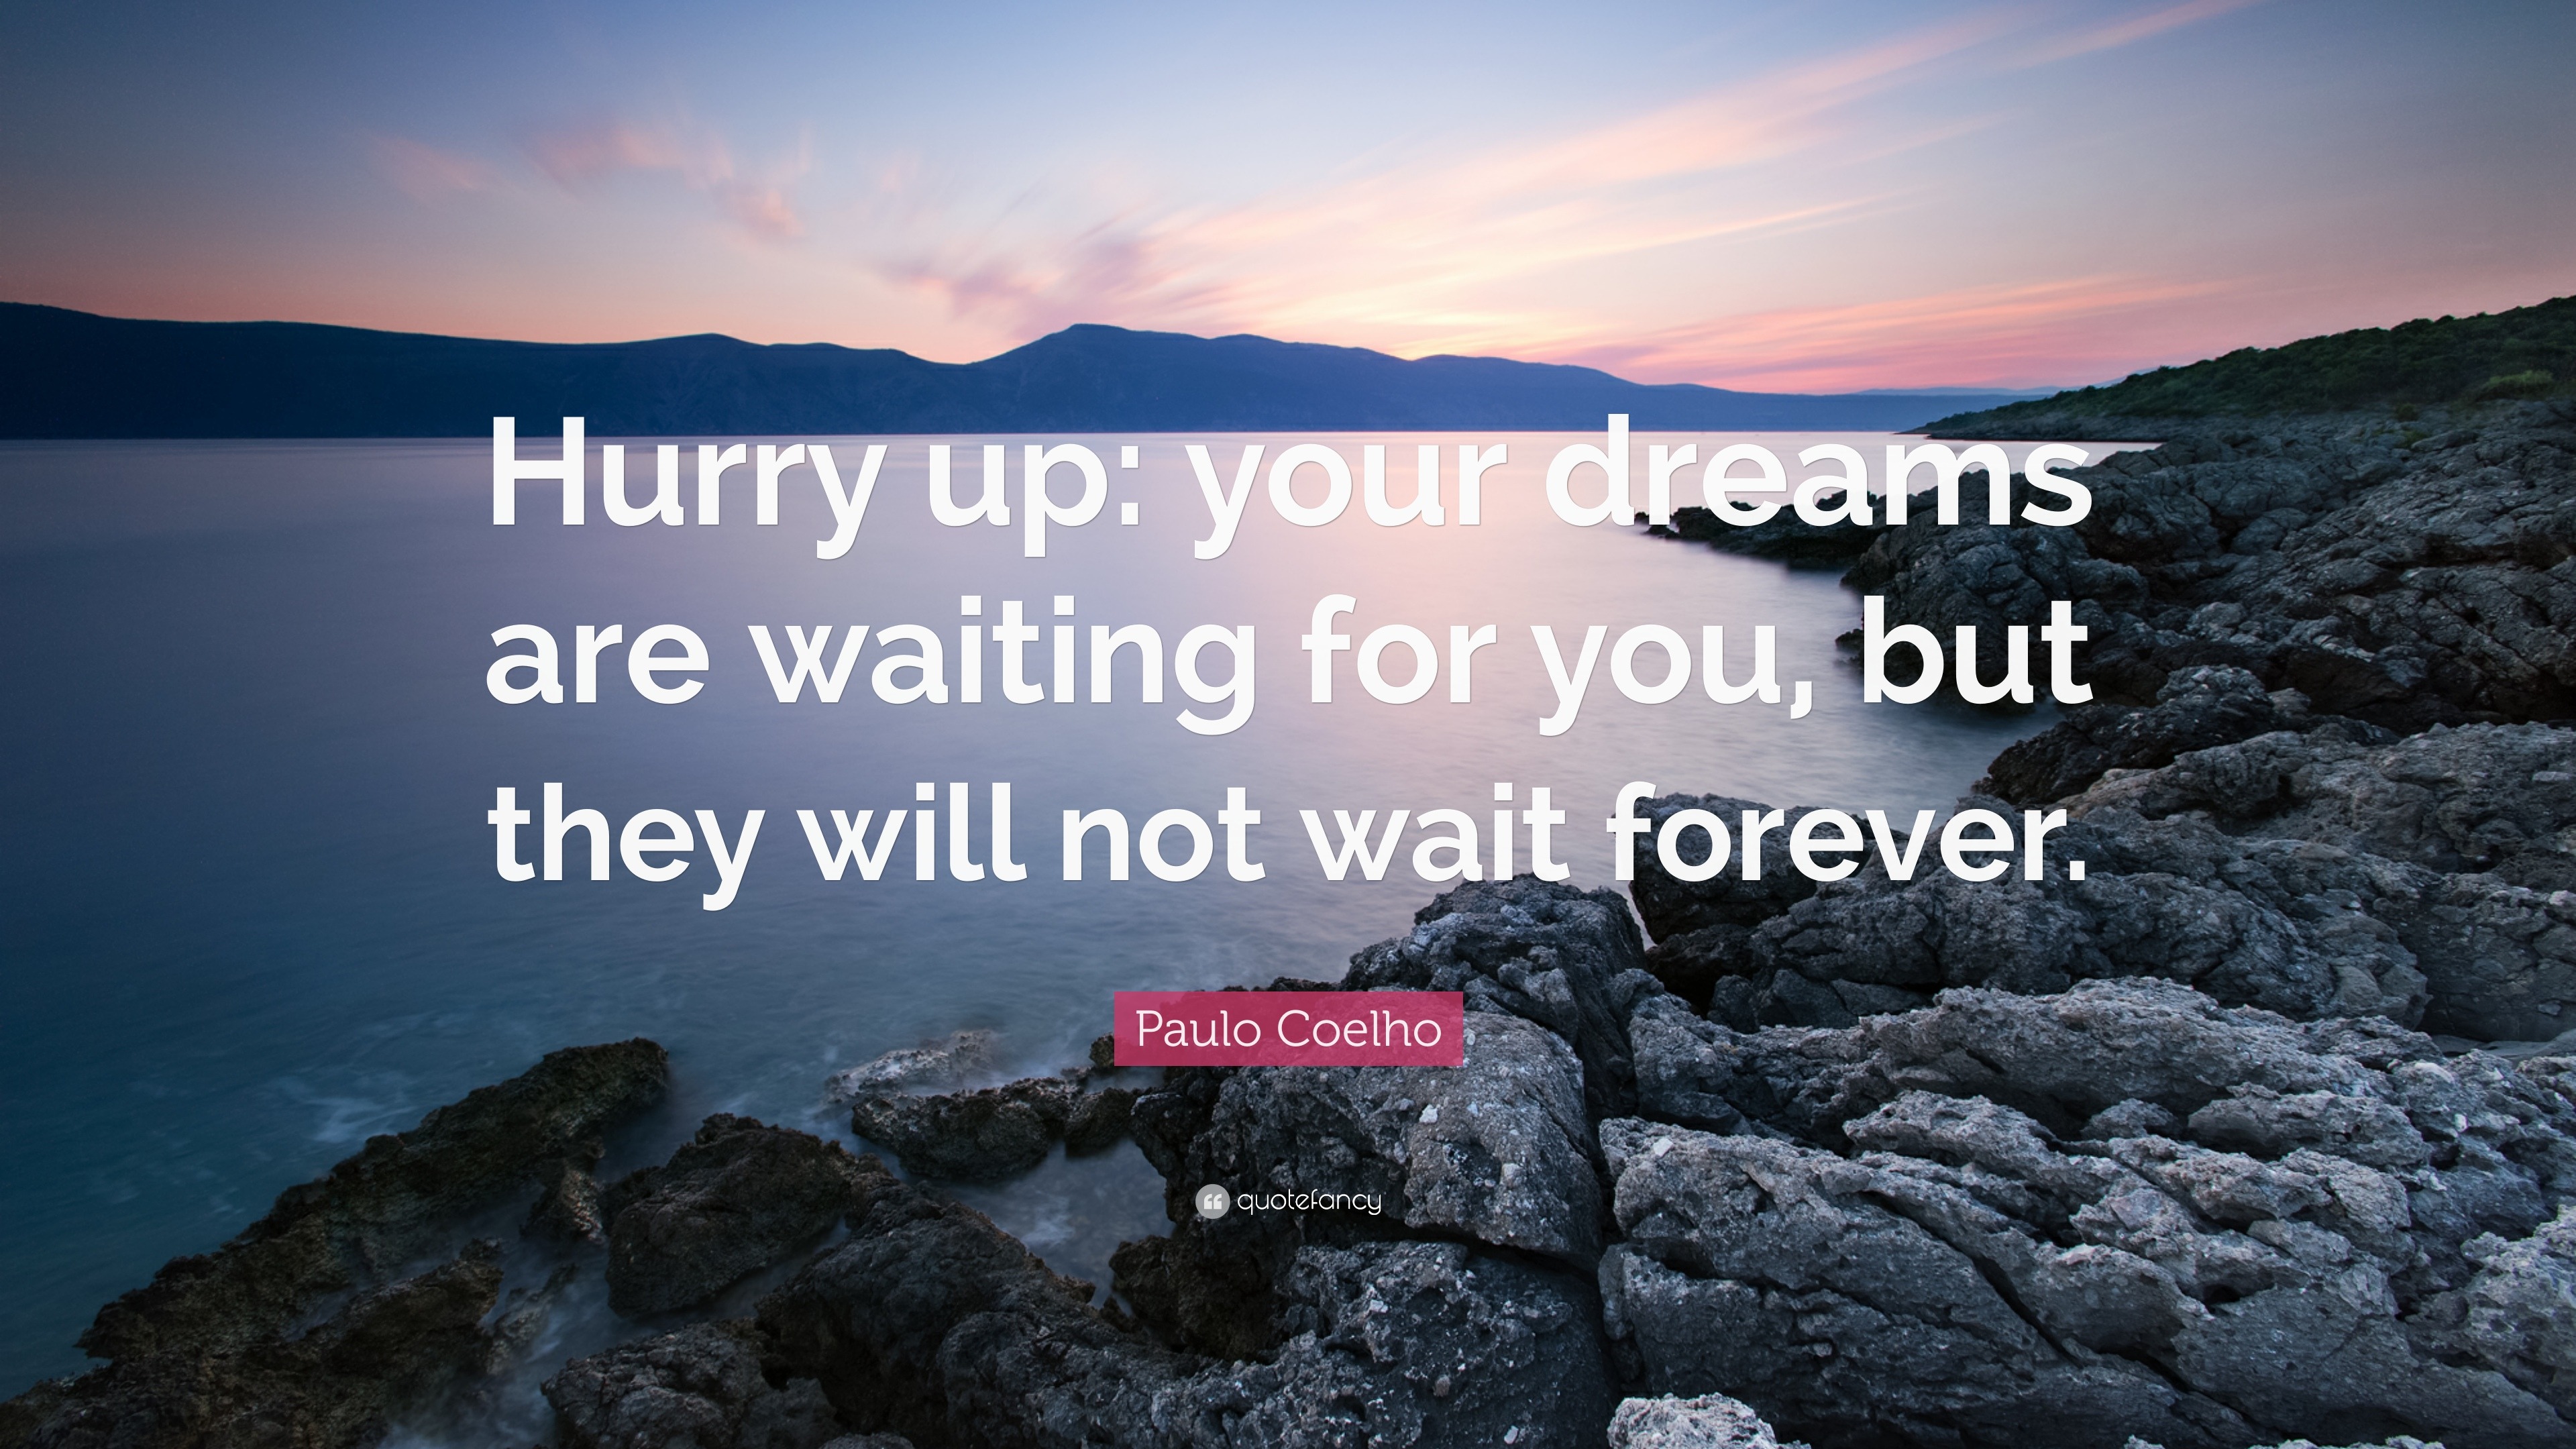 Paulo Coelho Quote: “Hurry up: your dreams are waiting for you, but ...